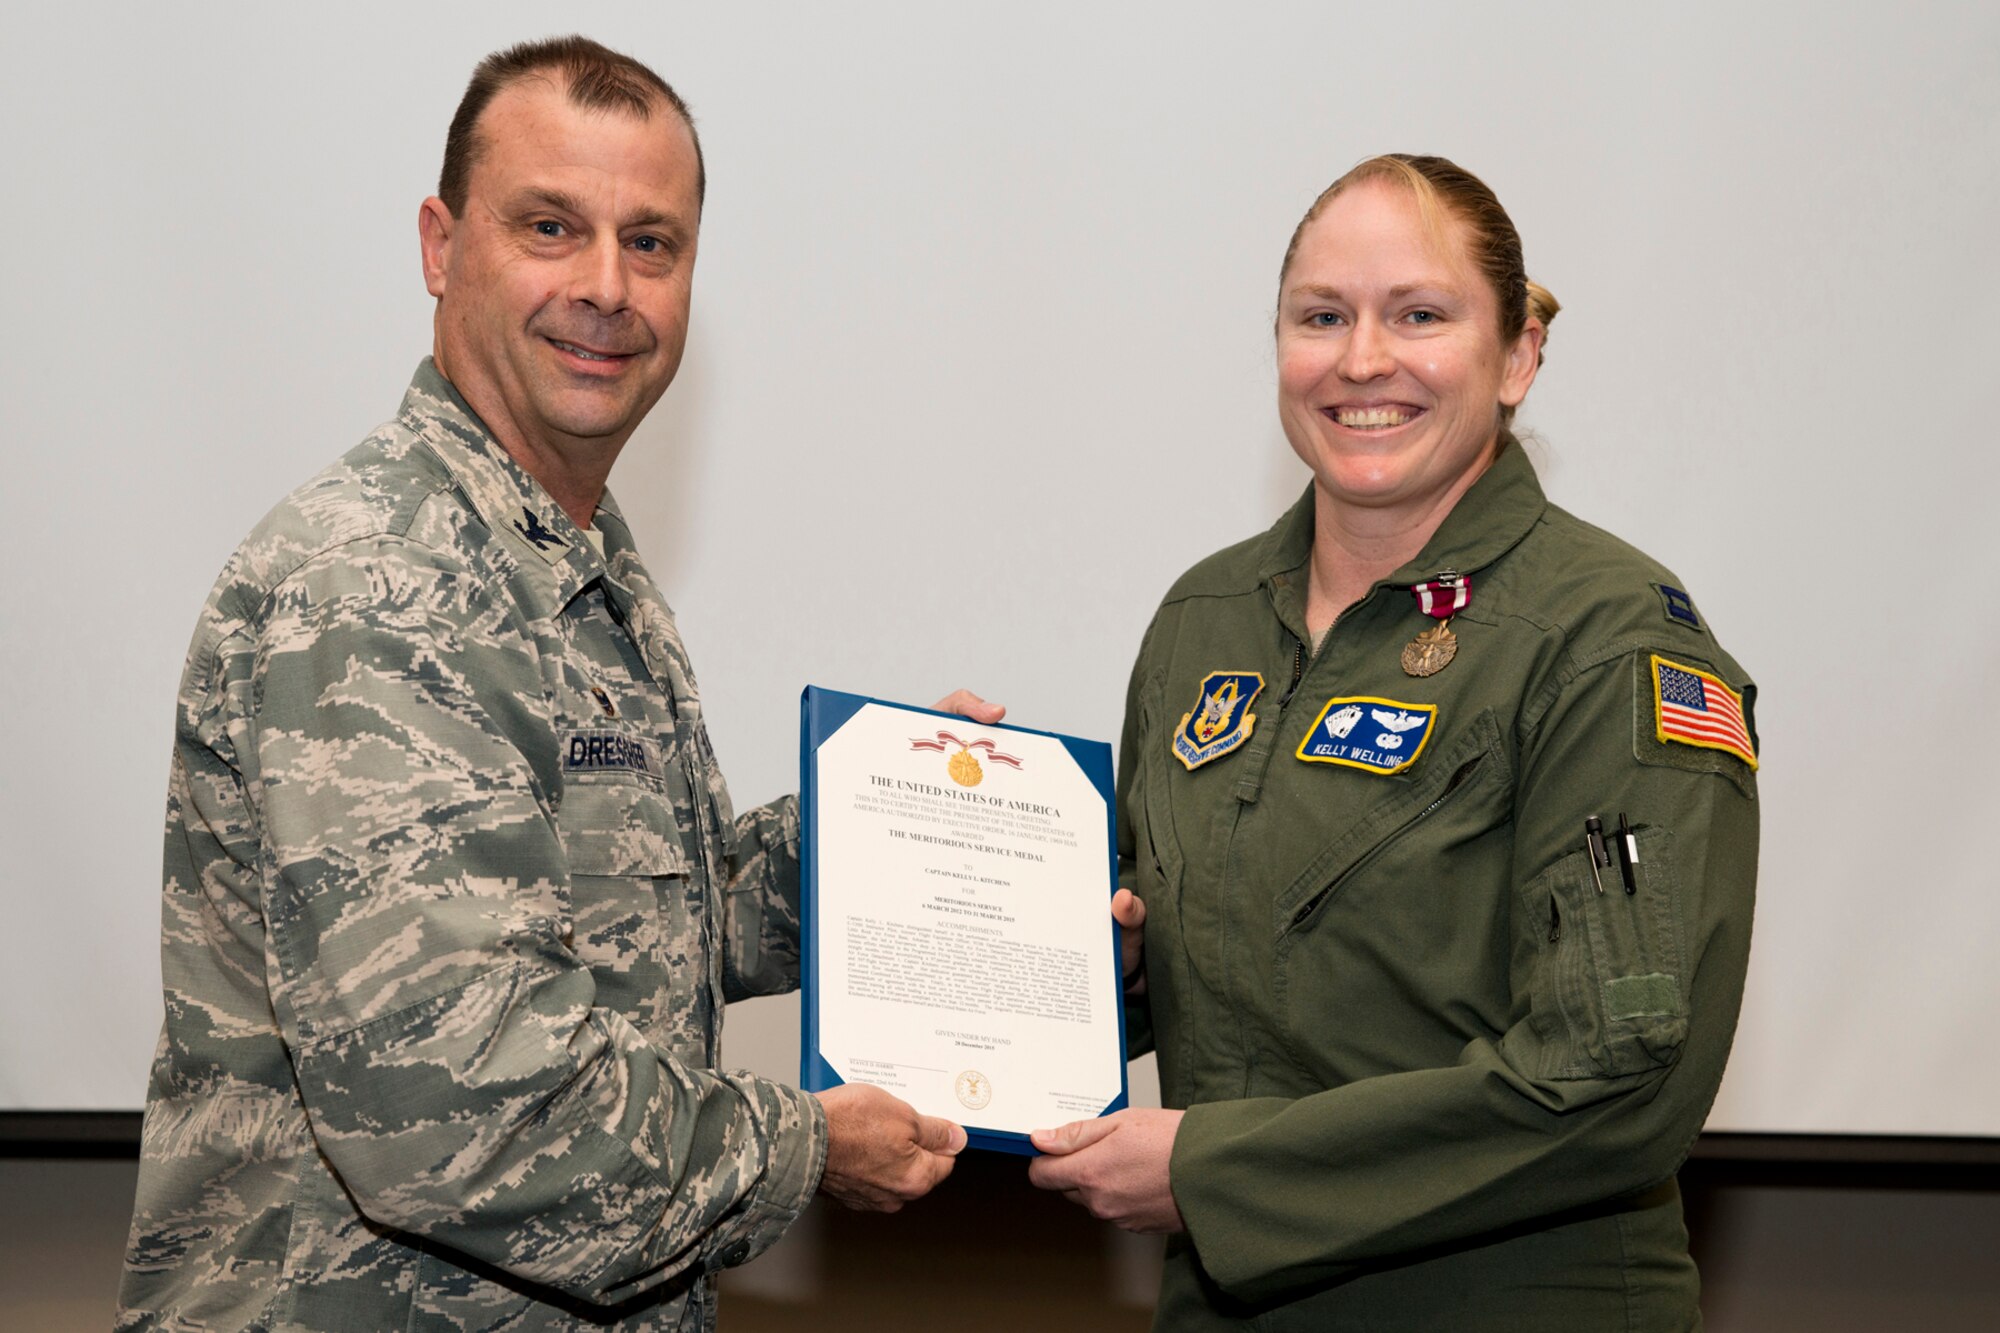 U.S. Air Force Reserve Col. Craig Drescher, commander, 913th Airlift Group, and Capt. Kelly Welling, instructor pilot, 327th Airlift Squadron, pose for a photo during a commander’s call at Little Rock Air Force Base, Ark., Mar. 13, 2016. Welling was awarded the Meritorious Service Medal for outstanding achievement as the C-130H Instructor Pilot and Aircrew Flight Equipment Officer from 6 March 2012 to 31 March 2015. Drescher also recognized 11 additional individuals for personal achievements. (U.S. Air Force photo by Master Sgt. Jeff Walston/Released) 